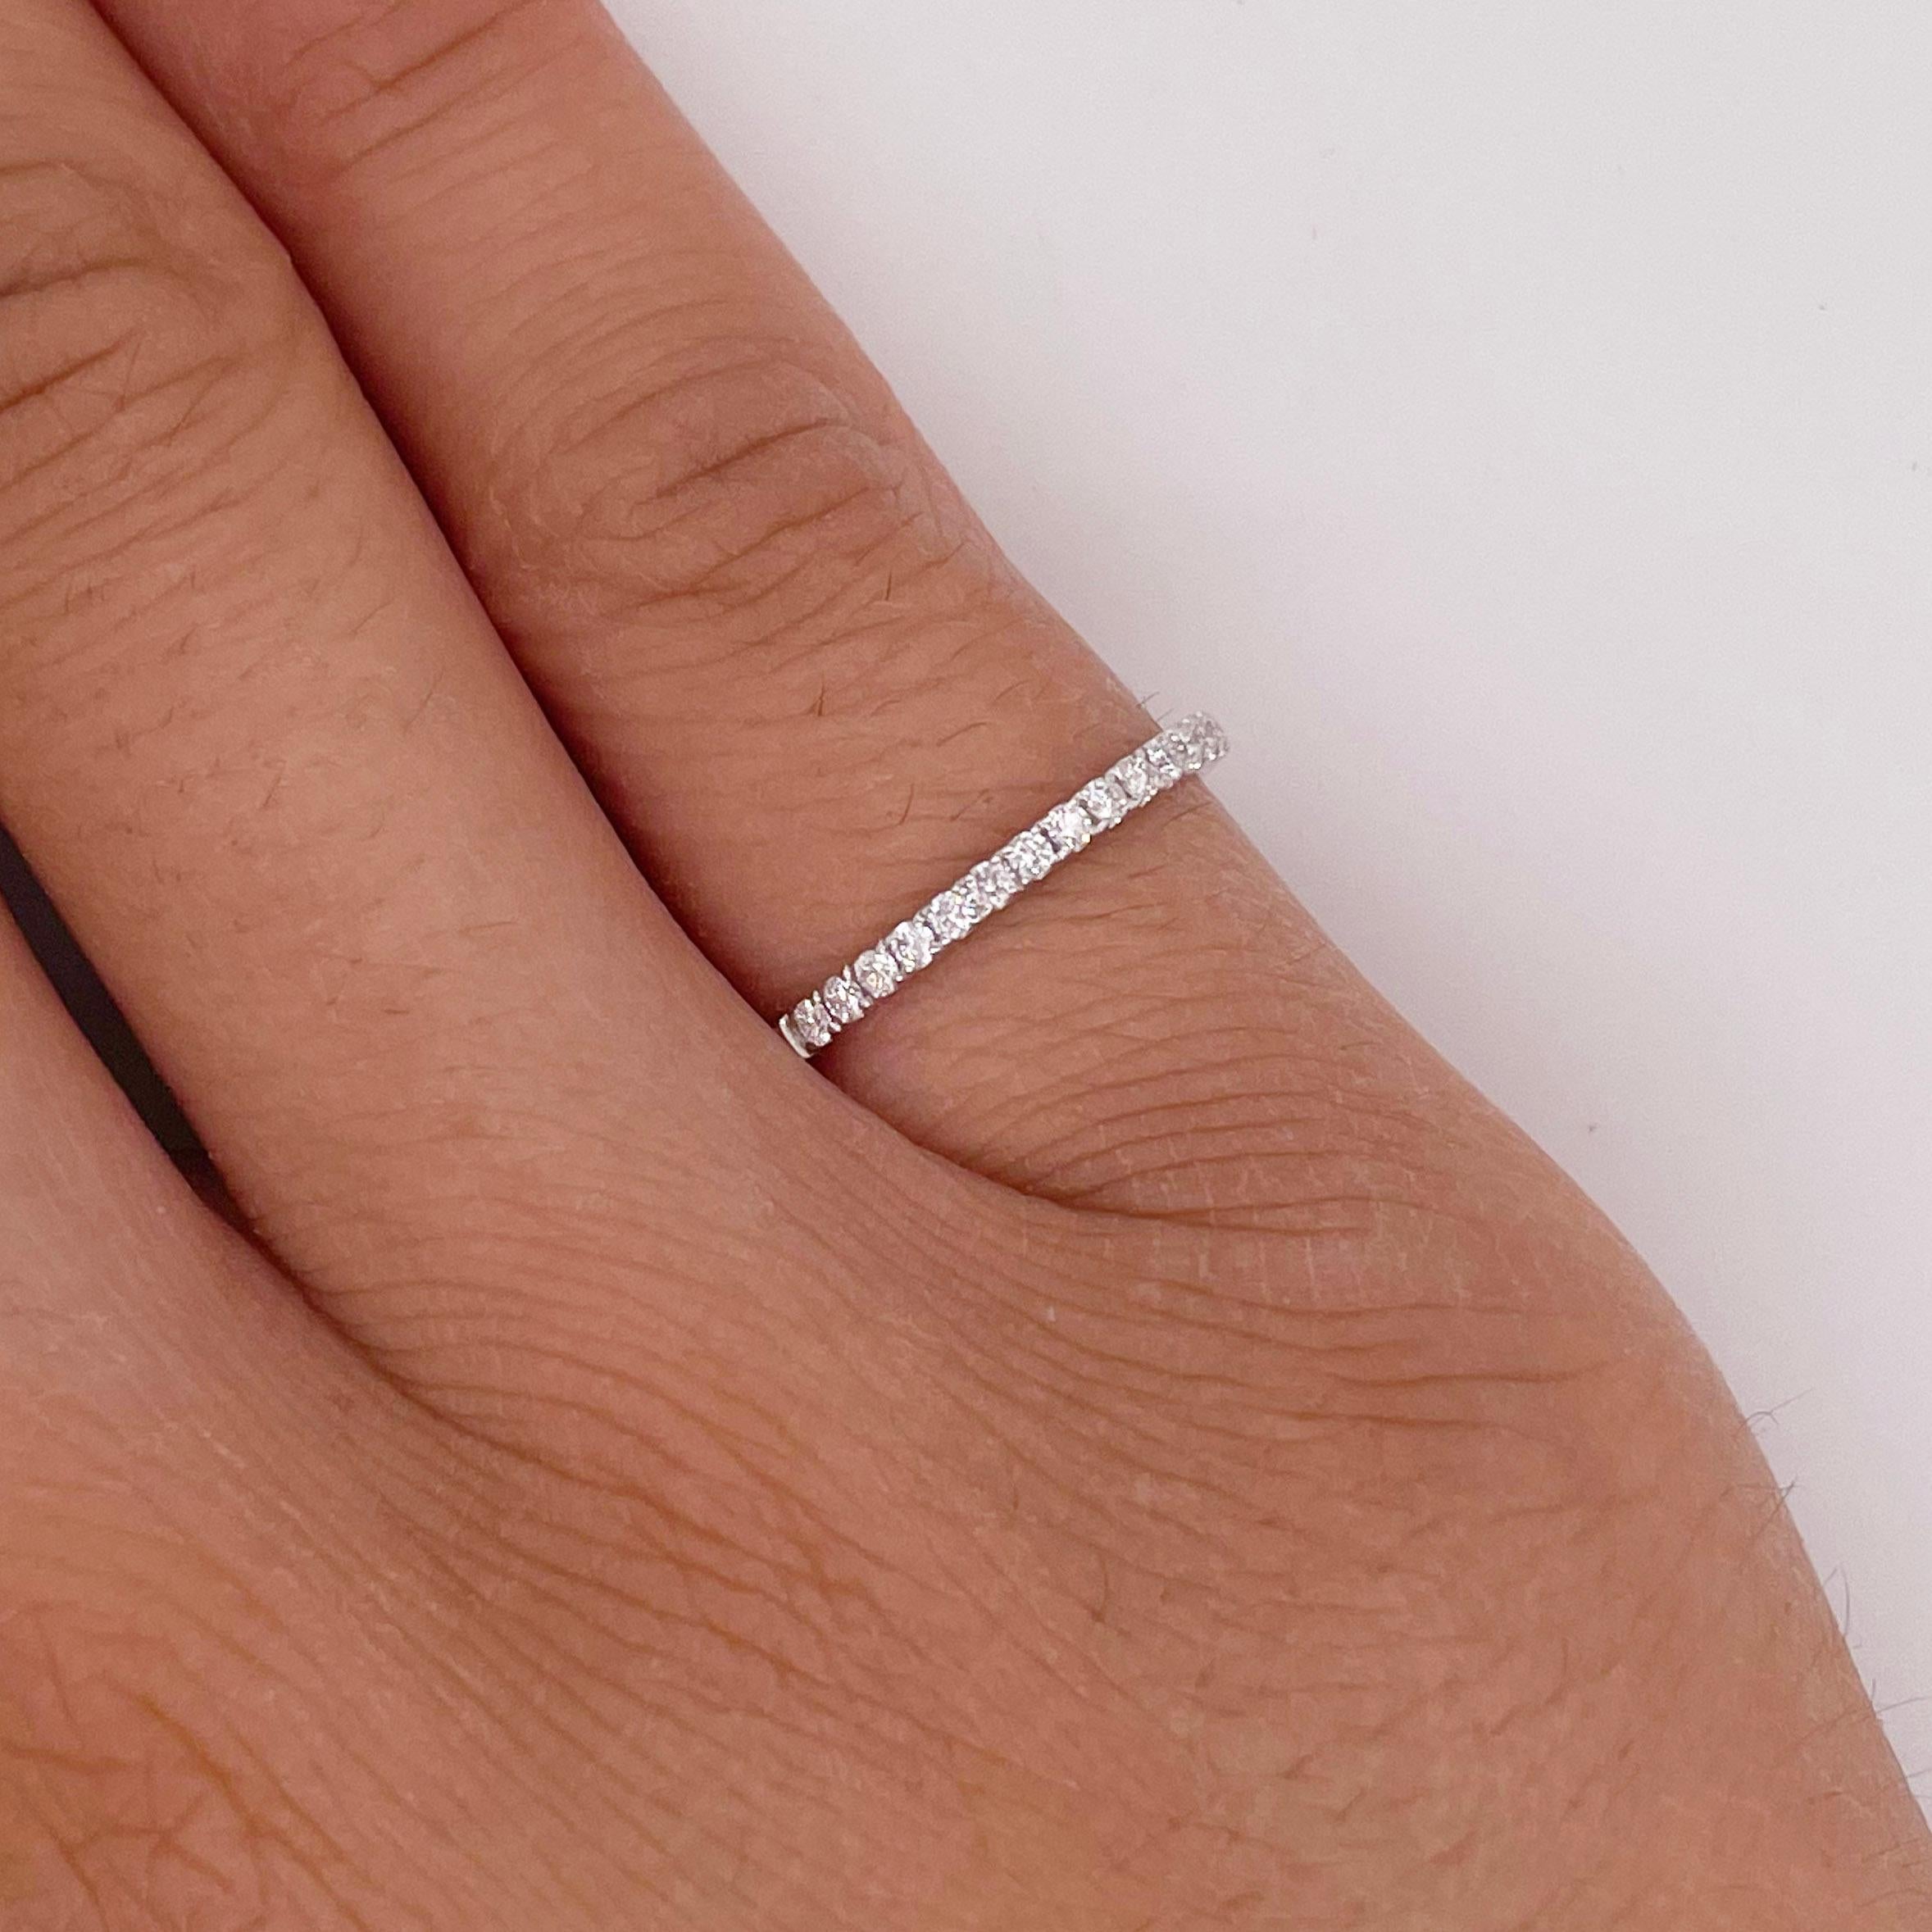 For Sale:  Diamond Band Ring, Stackable Band in 14K White Gold, .15 Carat Diamond Ring 2